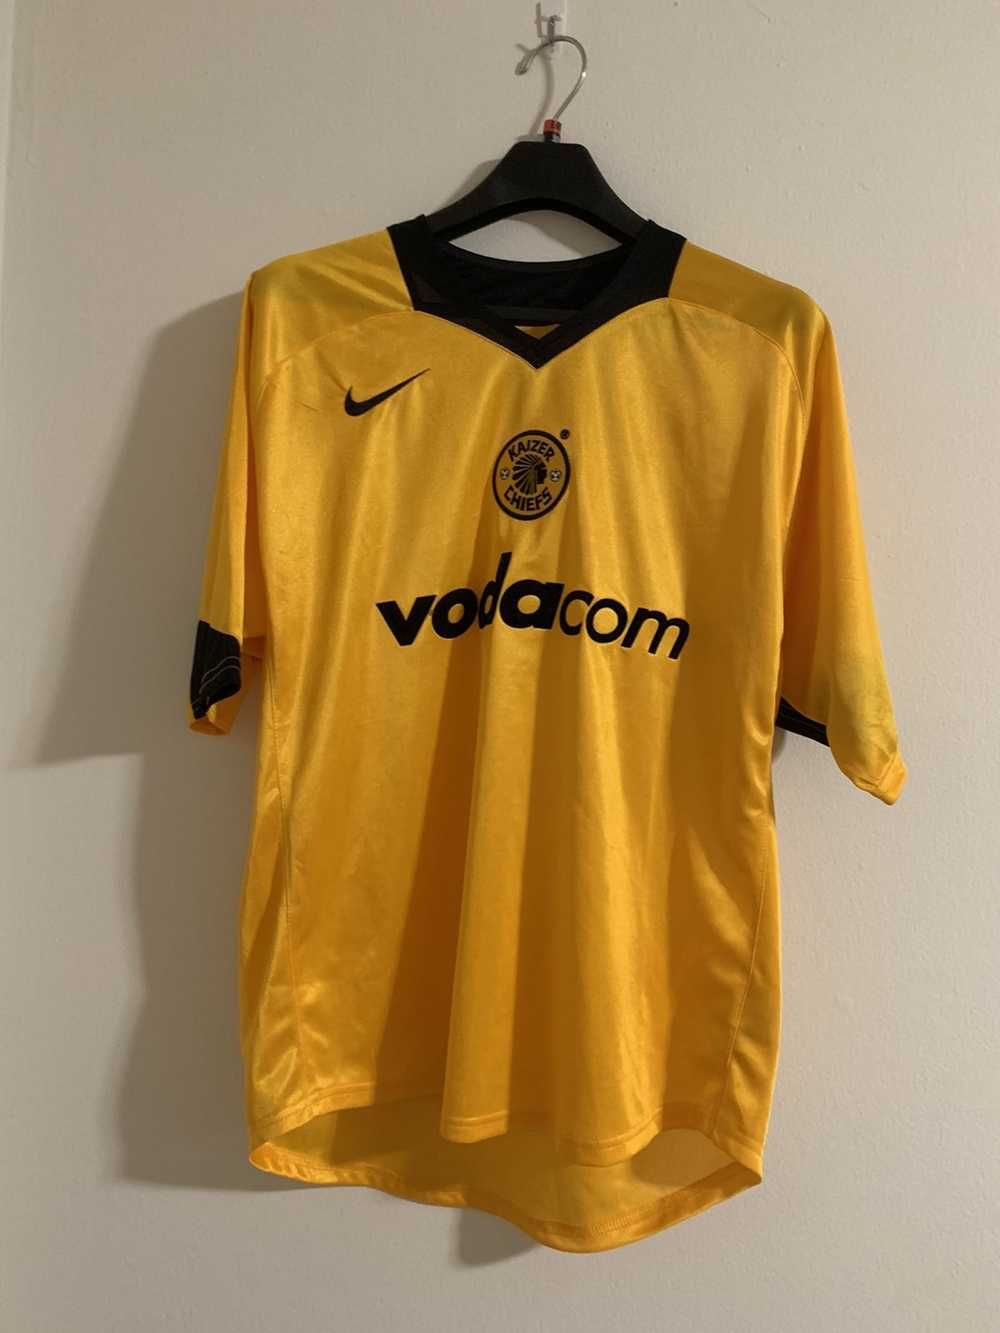 Soccer Jersey Rare Kaizer Chiefs home kit - image 1